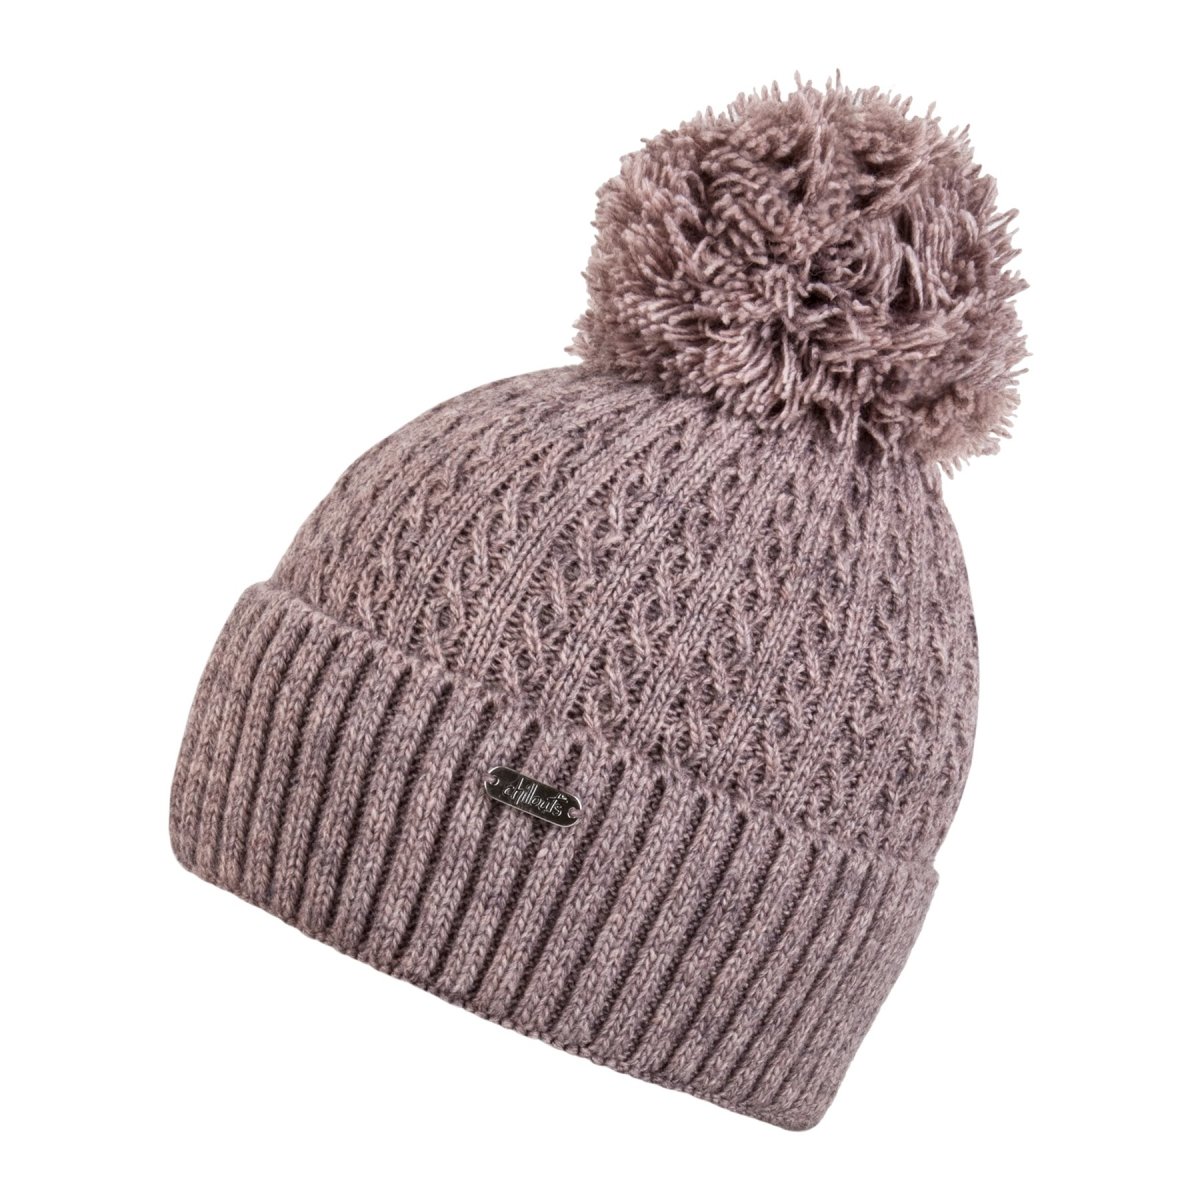 Bobble hat in natural with Chillouts & lining Headwear colors – removable bobble fleece